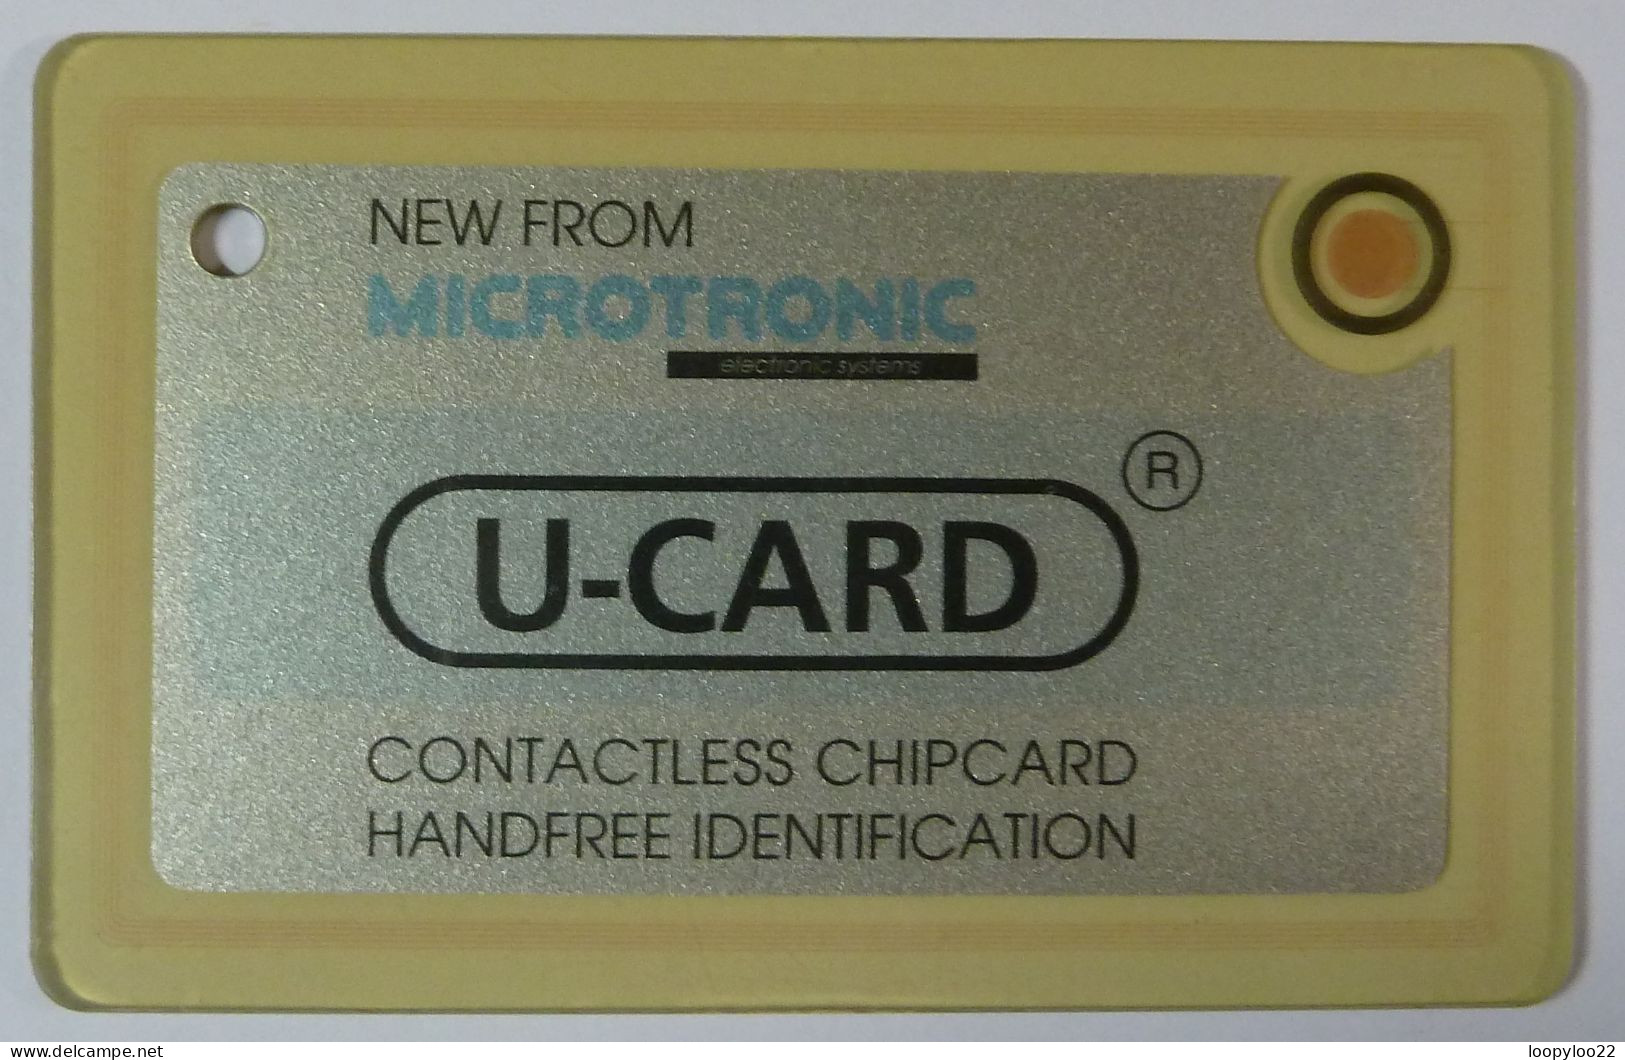 SWITZERLAND - Contactless Chipcard - U CARD - Microtronic - Smart Card - Suisse